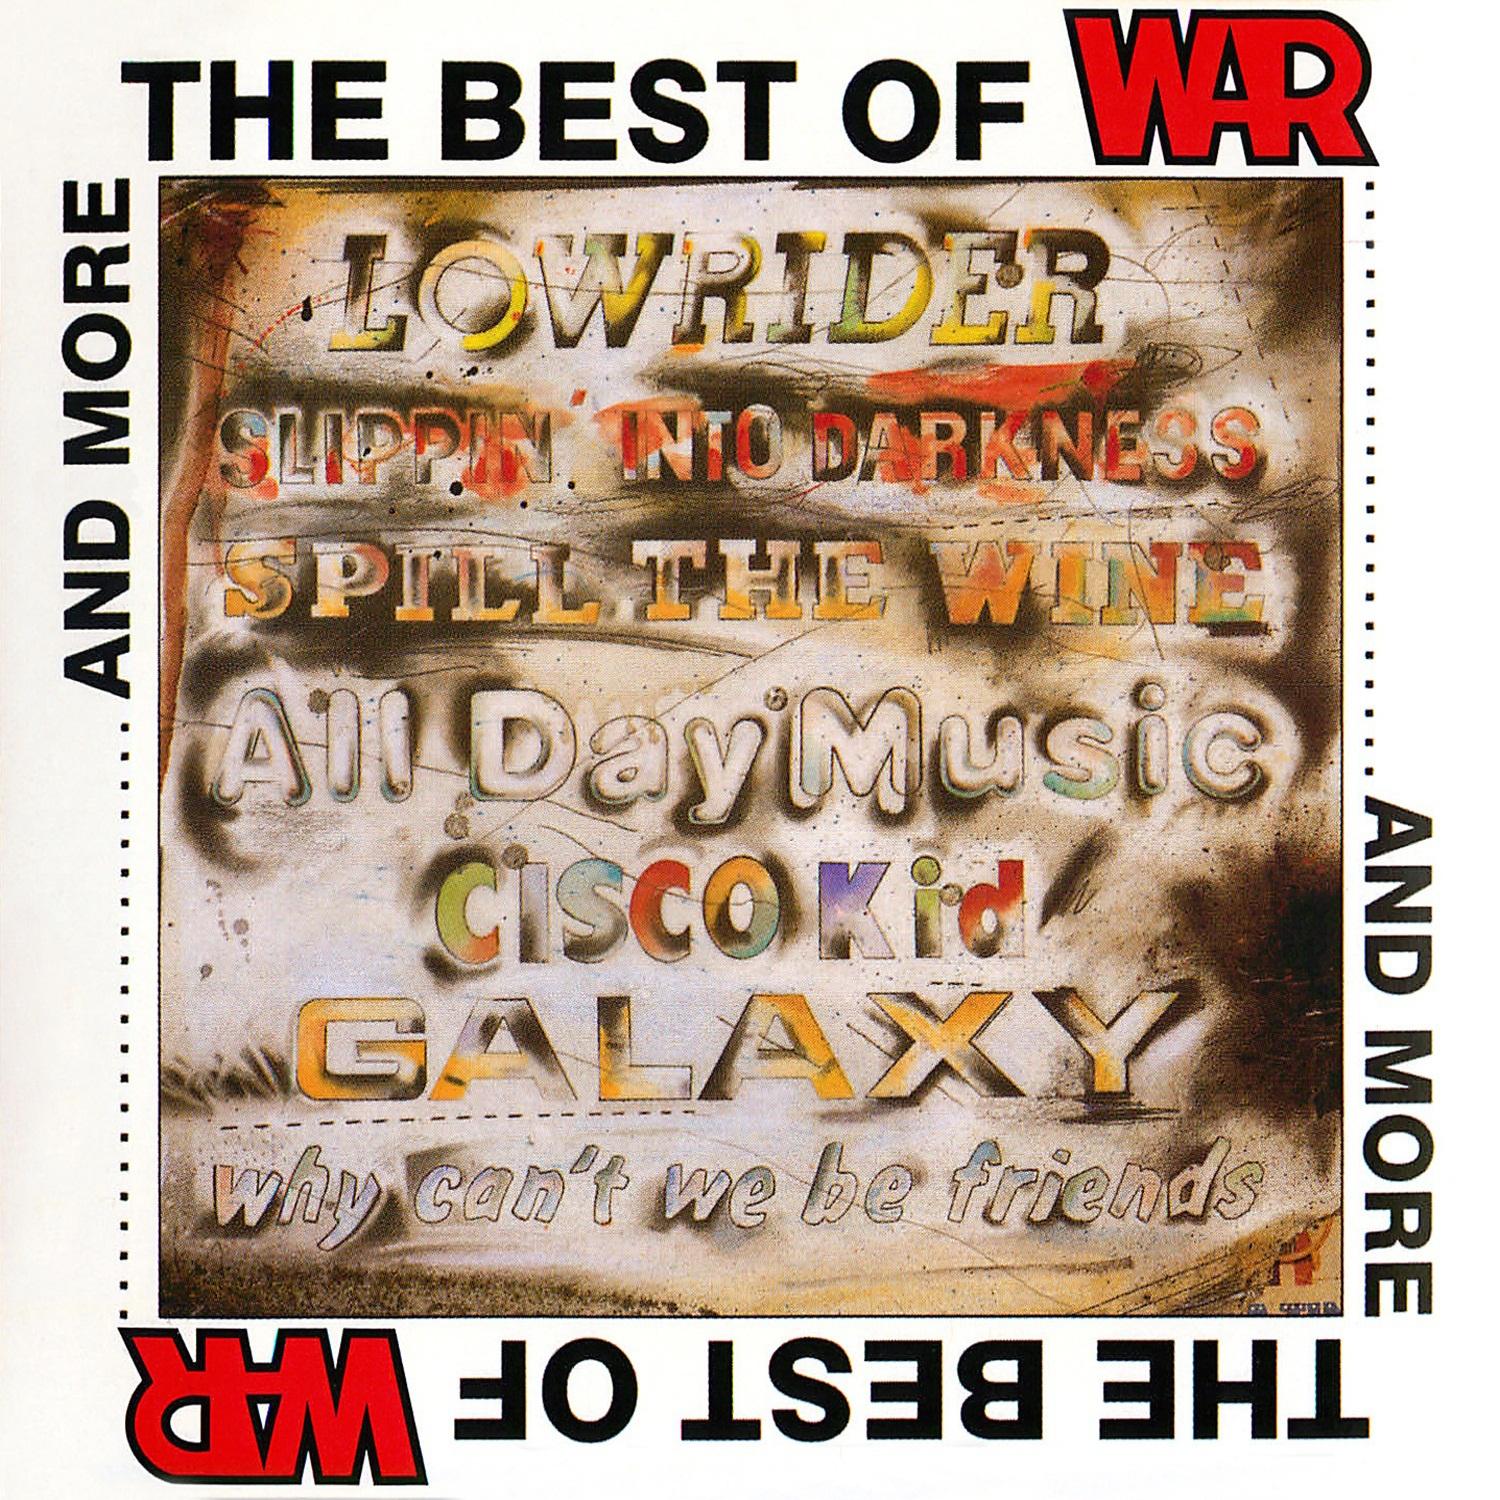 The Best of WAR and More, Vol. 1专辑